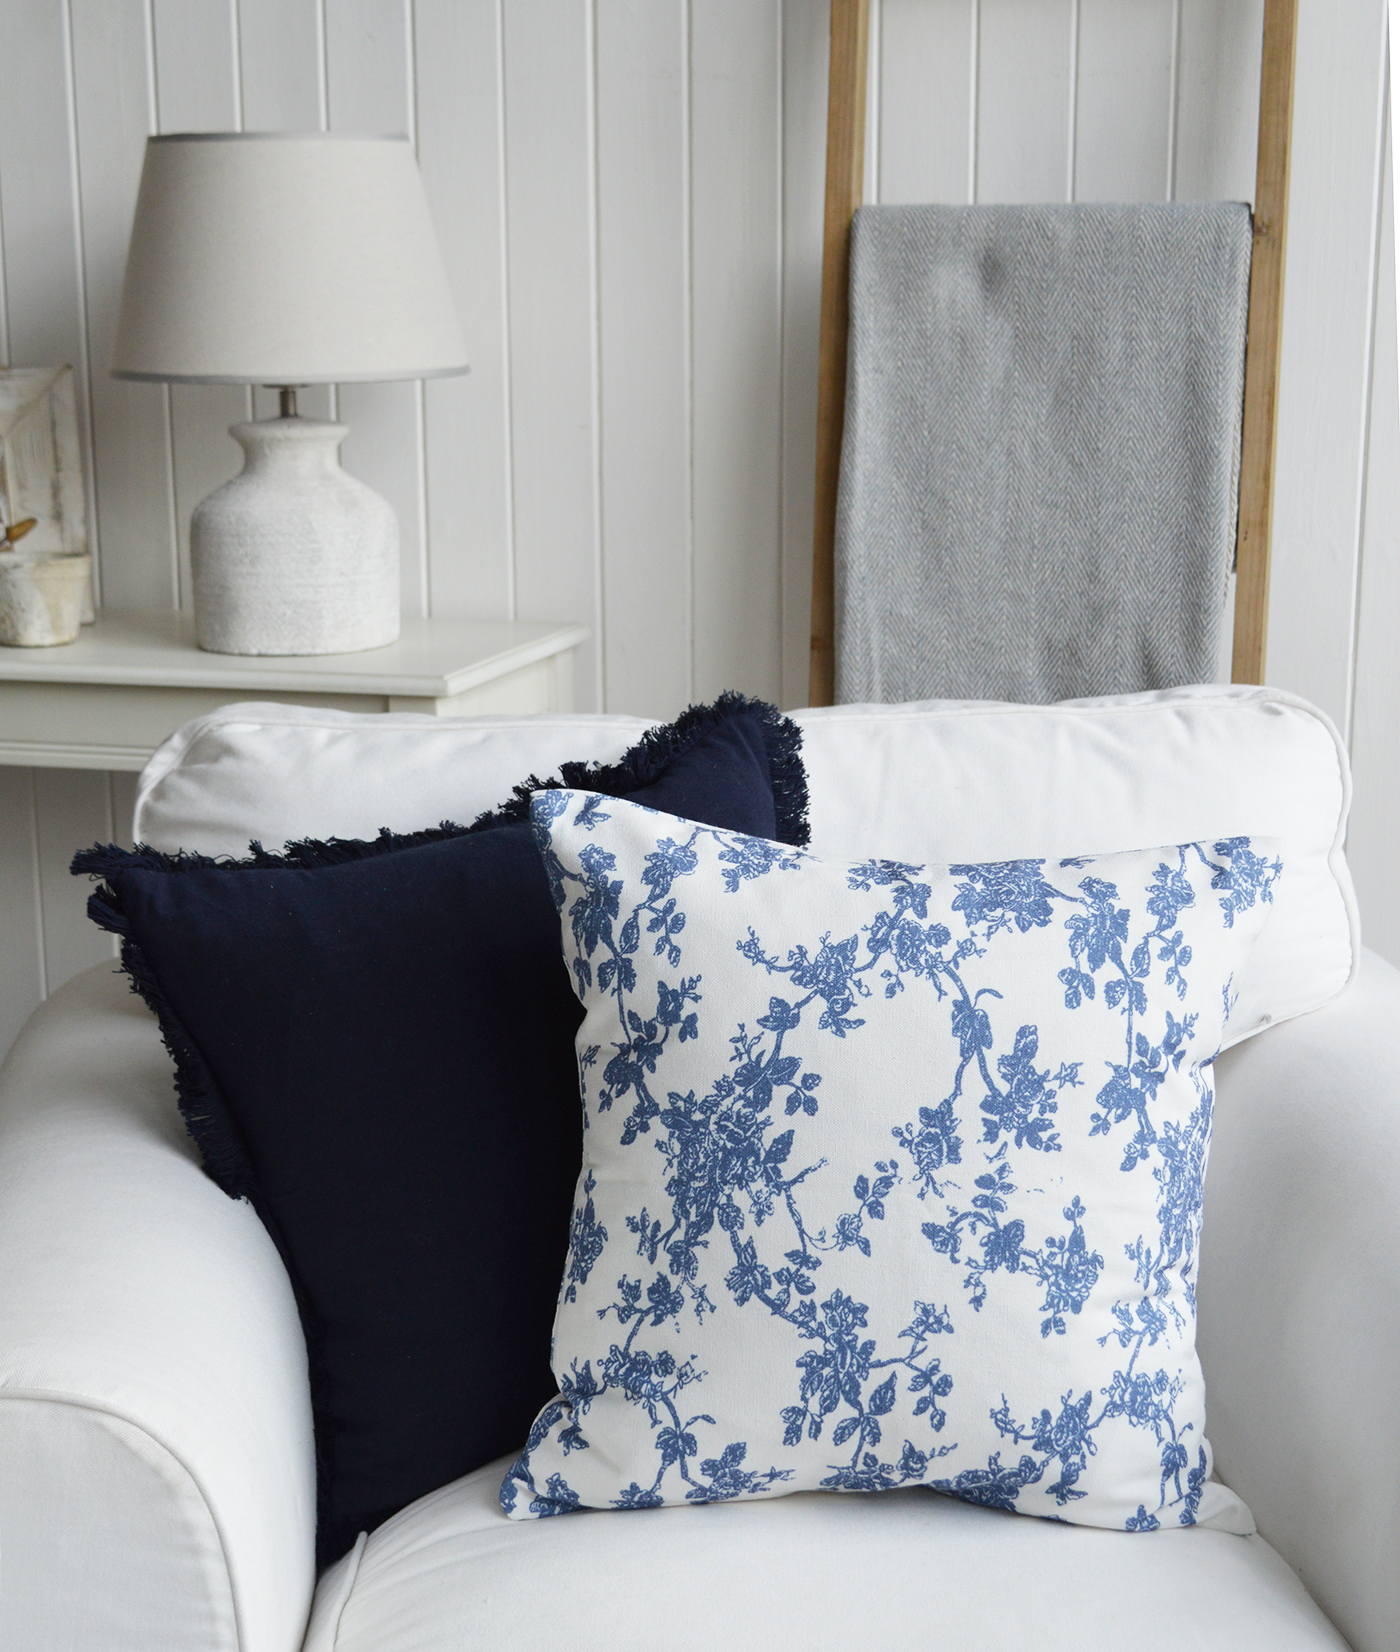 Blue and white floral cushion